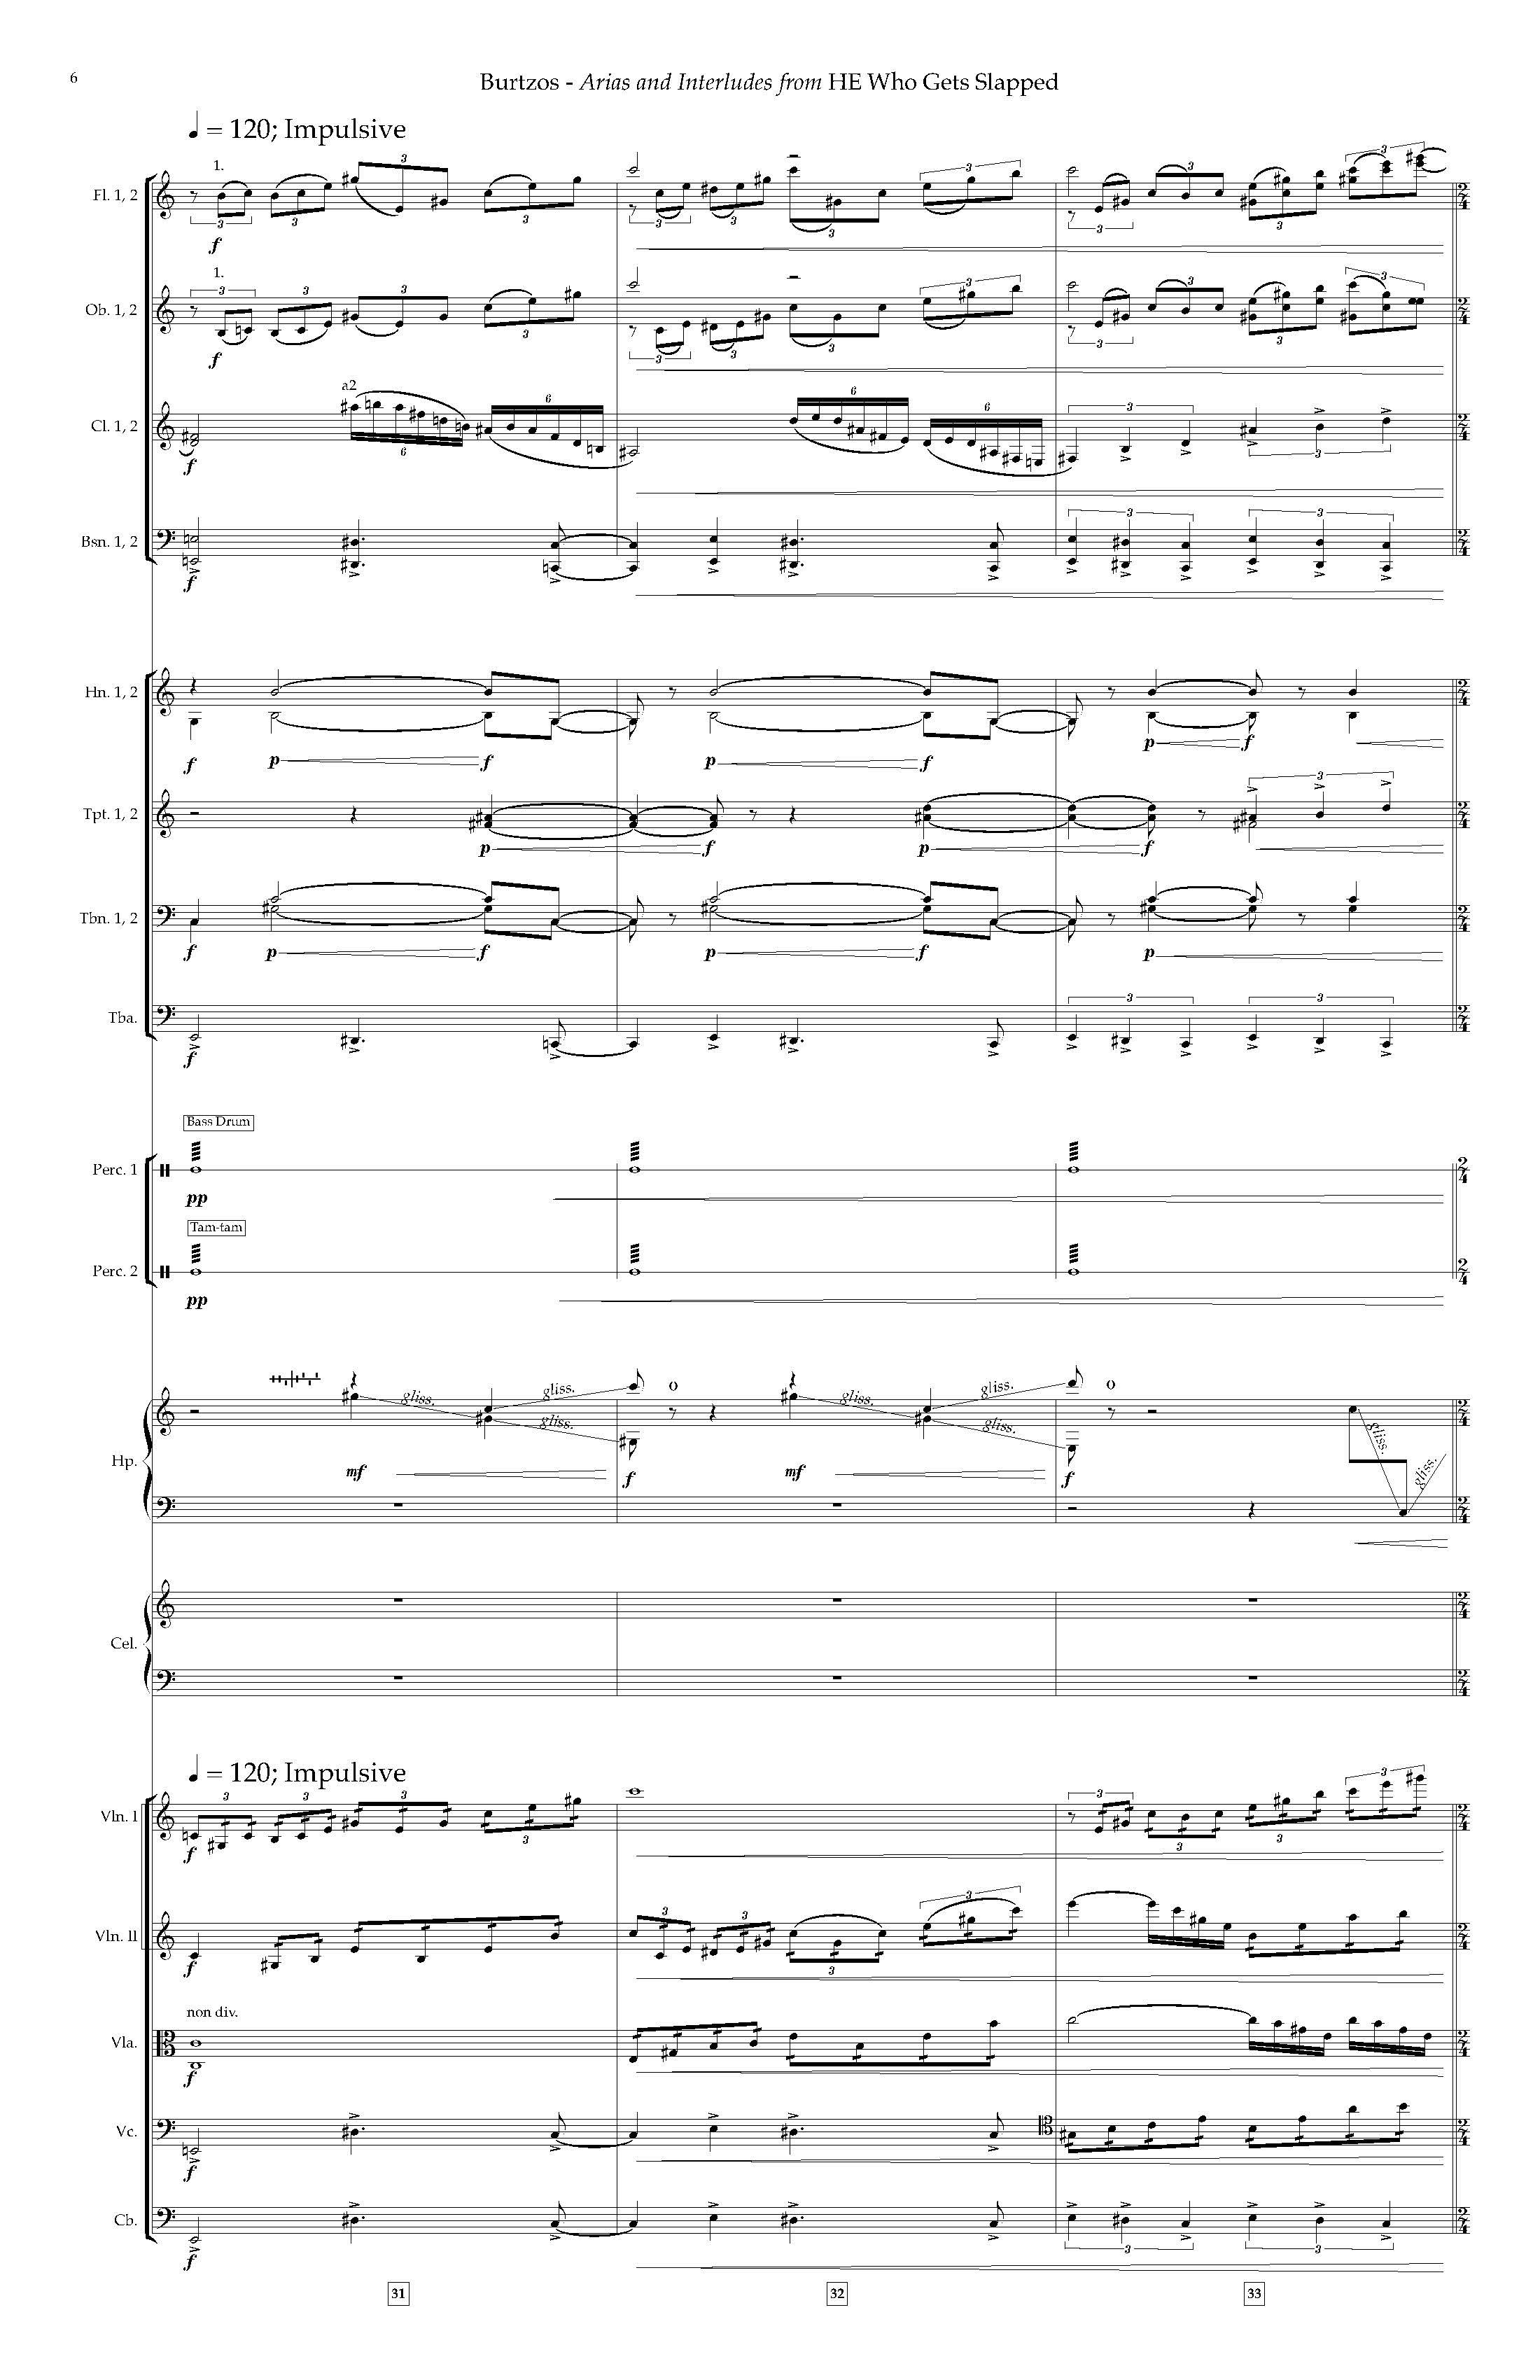 Arias and Interludes from HWGS - Complete Score_Page_12.jpg